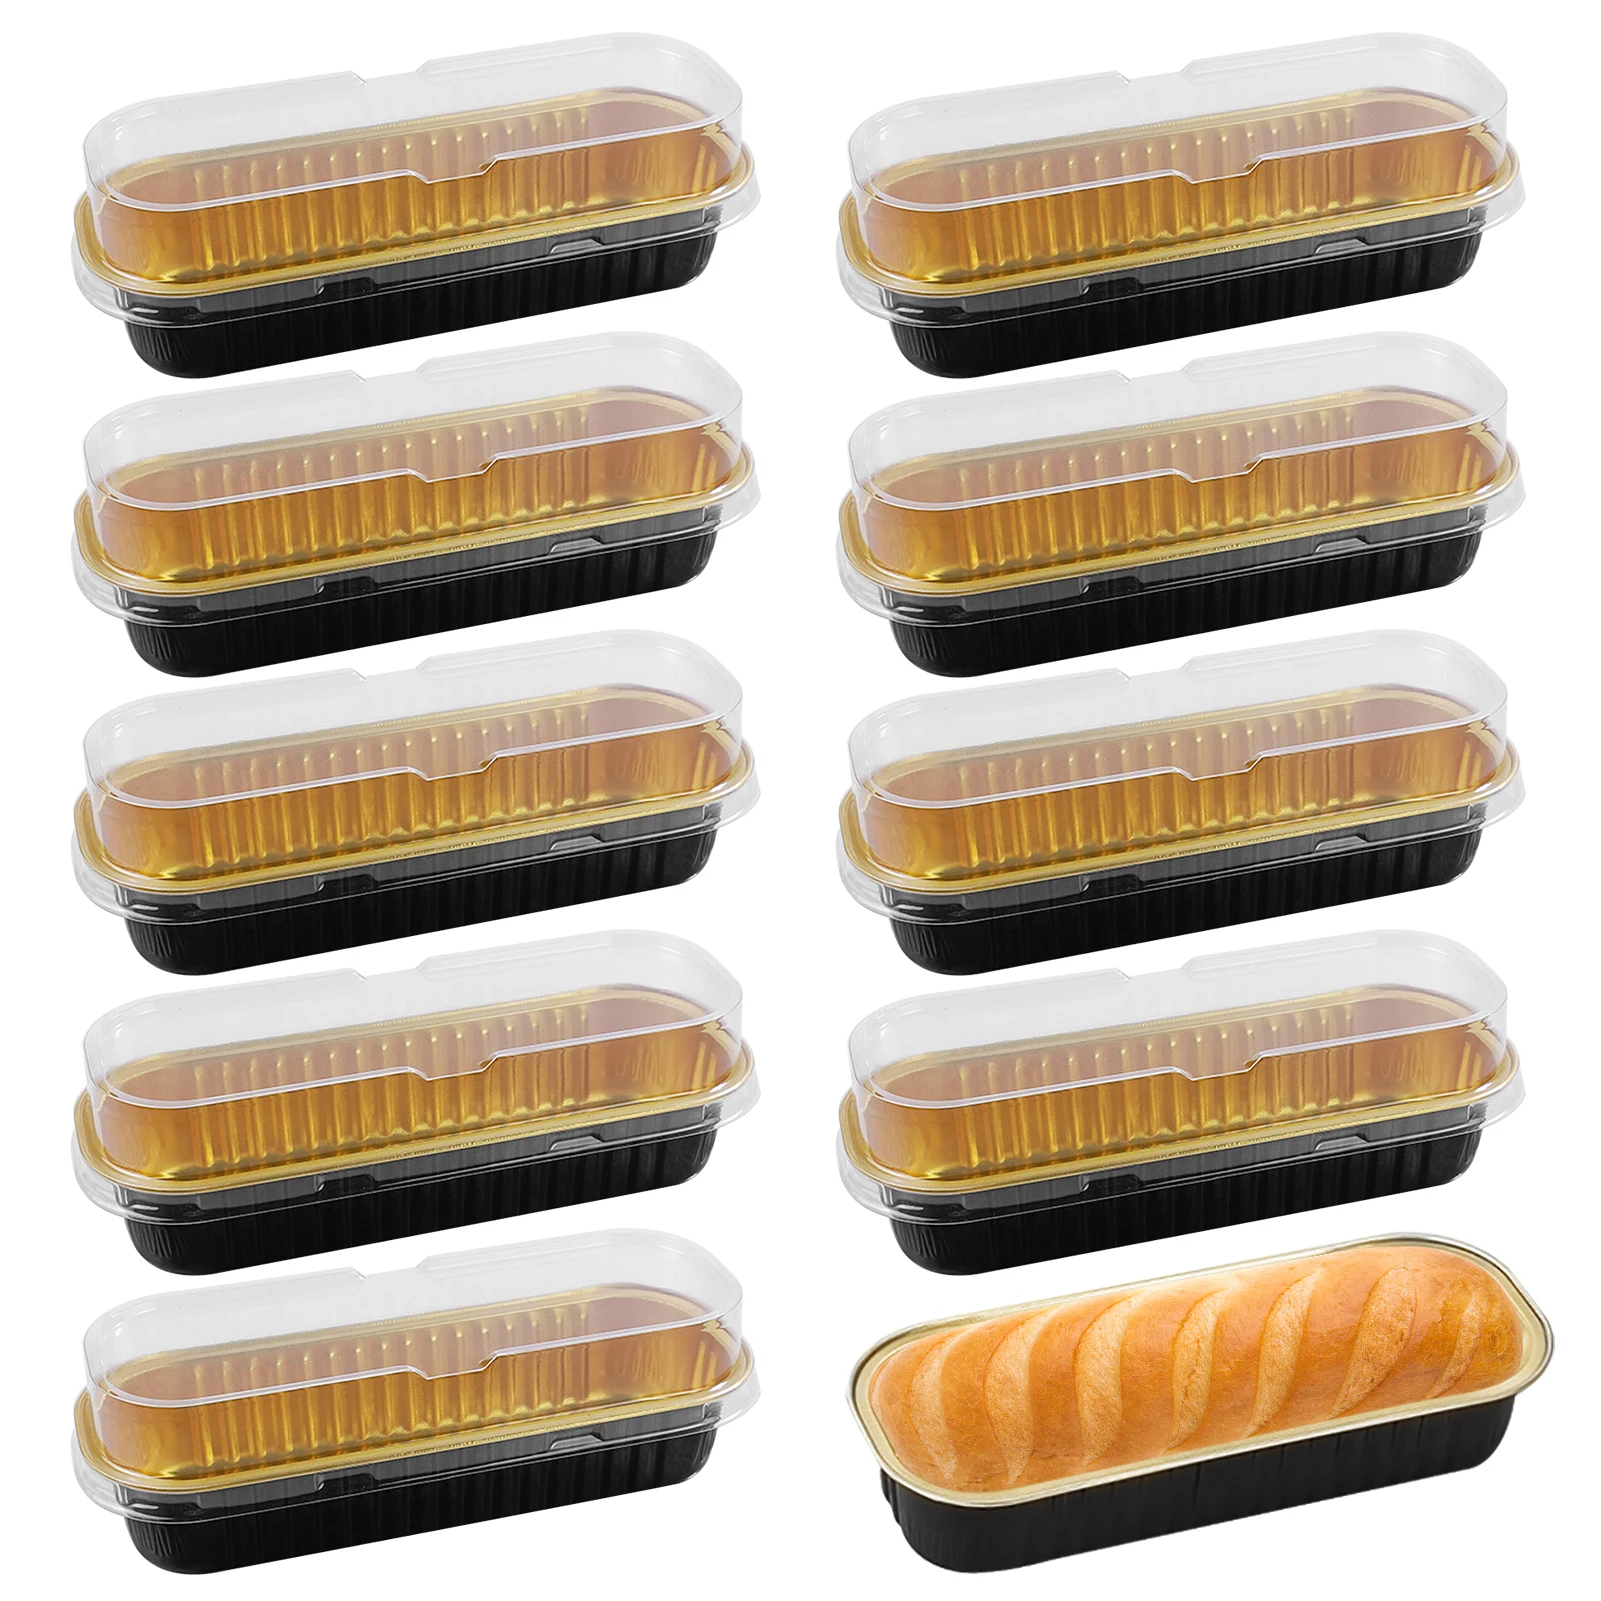 

50pcs Aluminum Foil With Lids Tins Liners Muffin Disposable Cheesecake Mini Loaf Baking Pan Cupcake Flans For Bread Rectangle